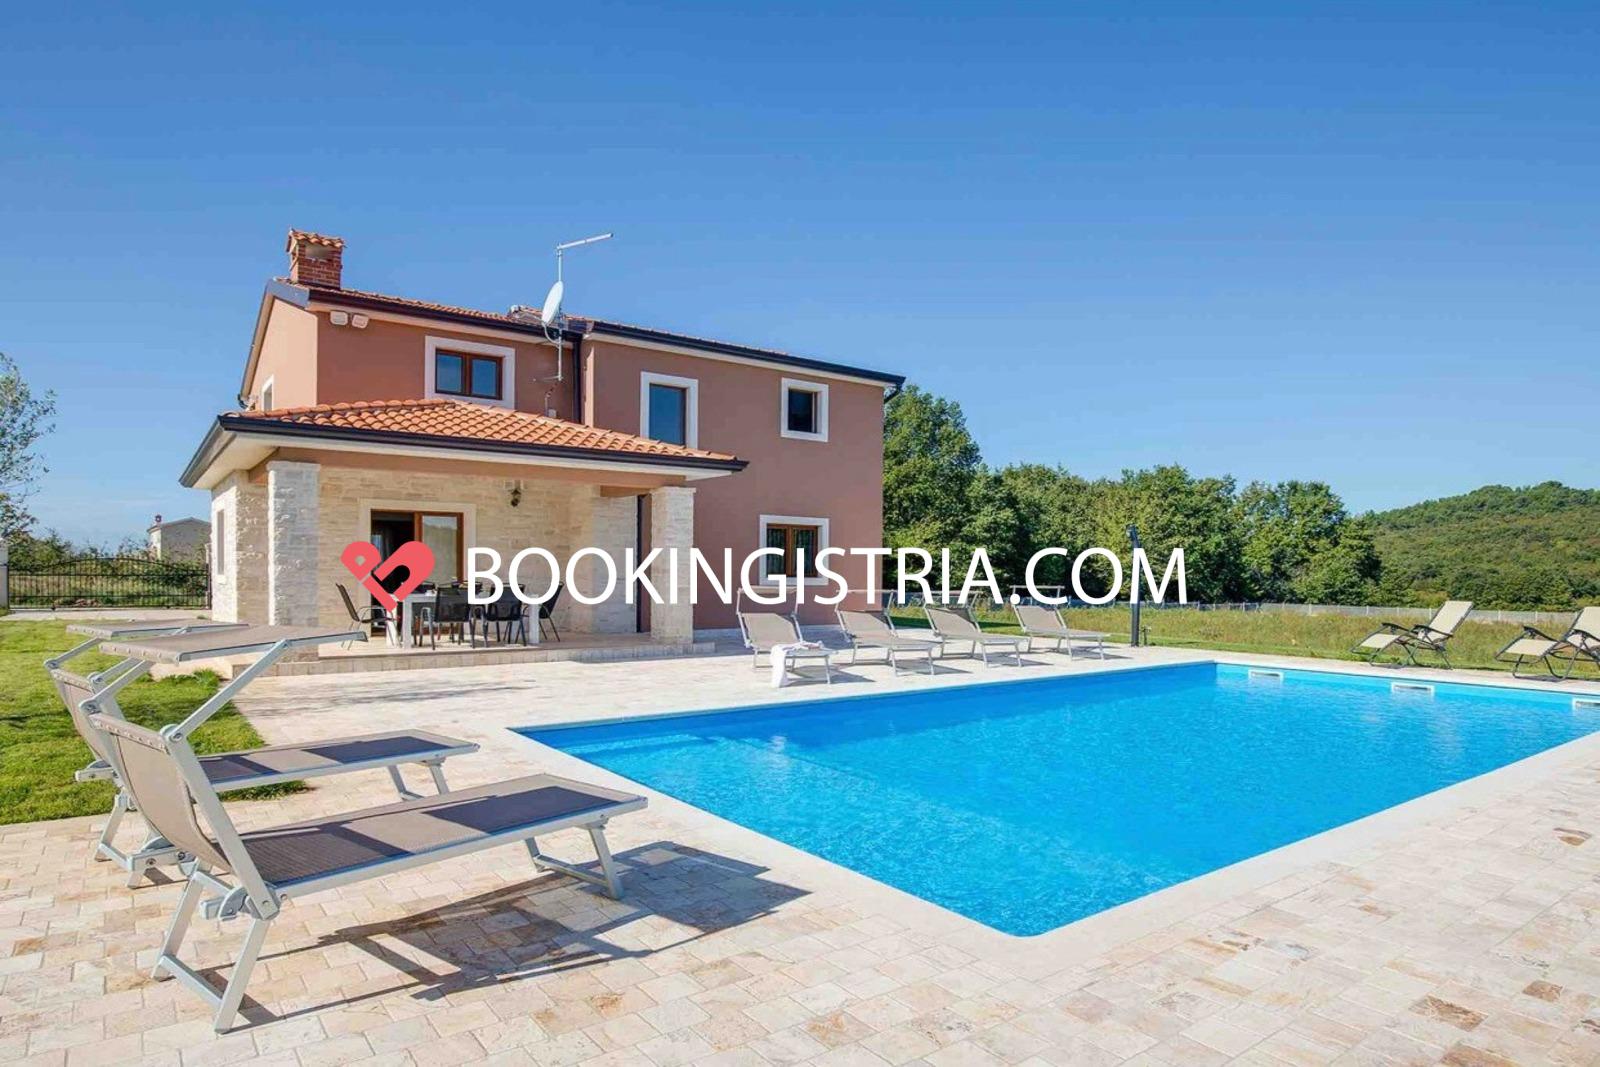 booking-istria